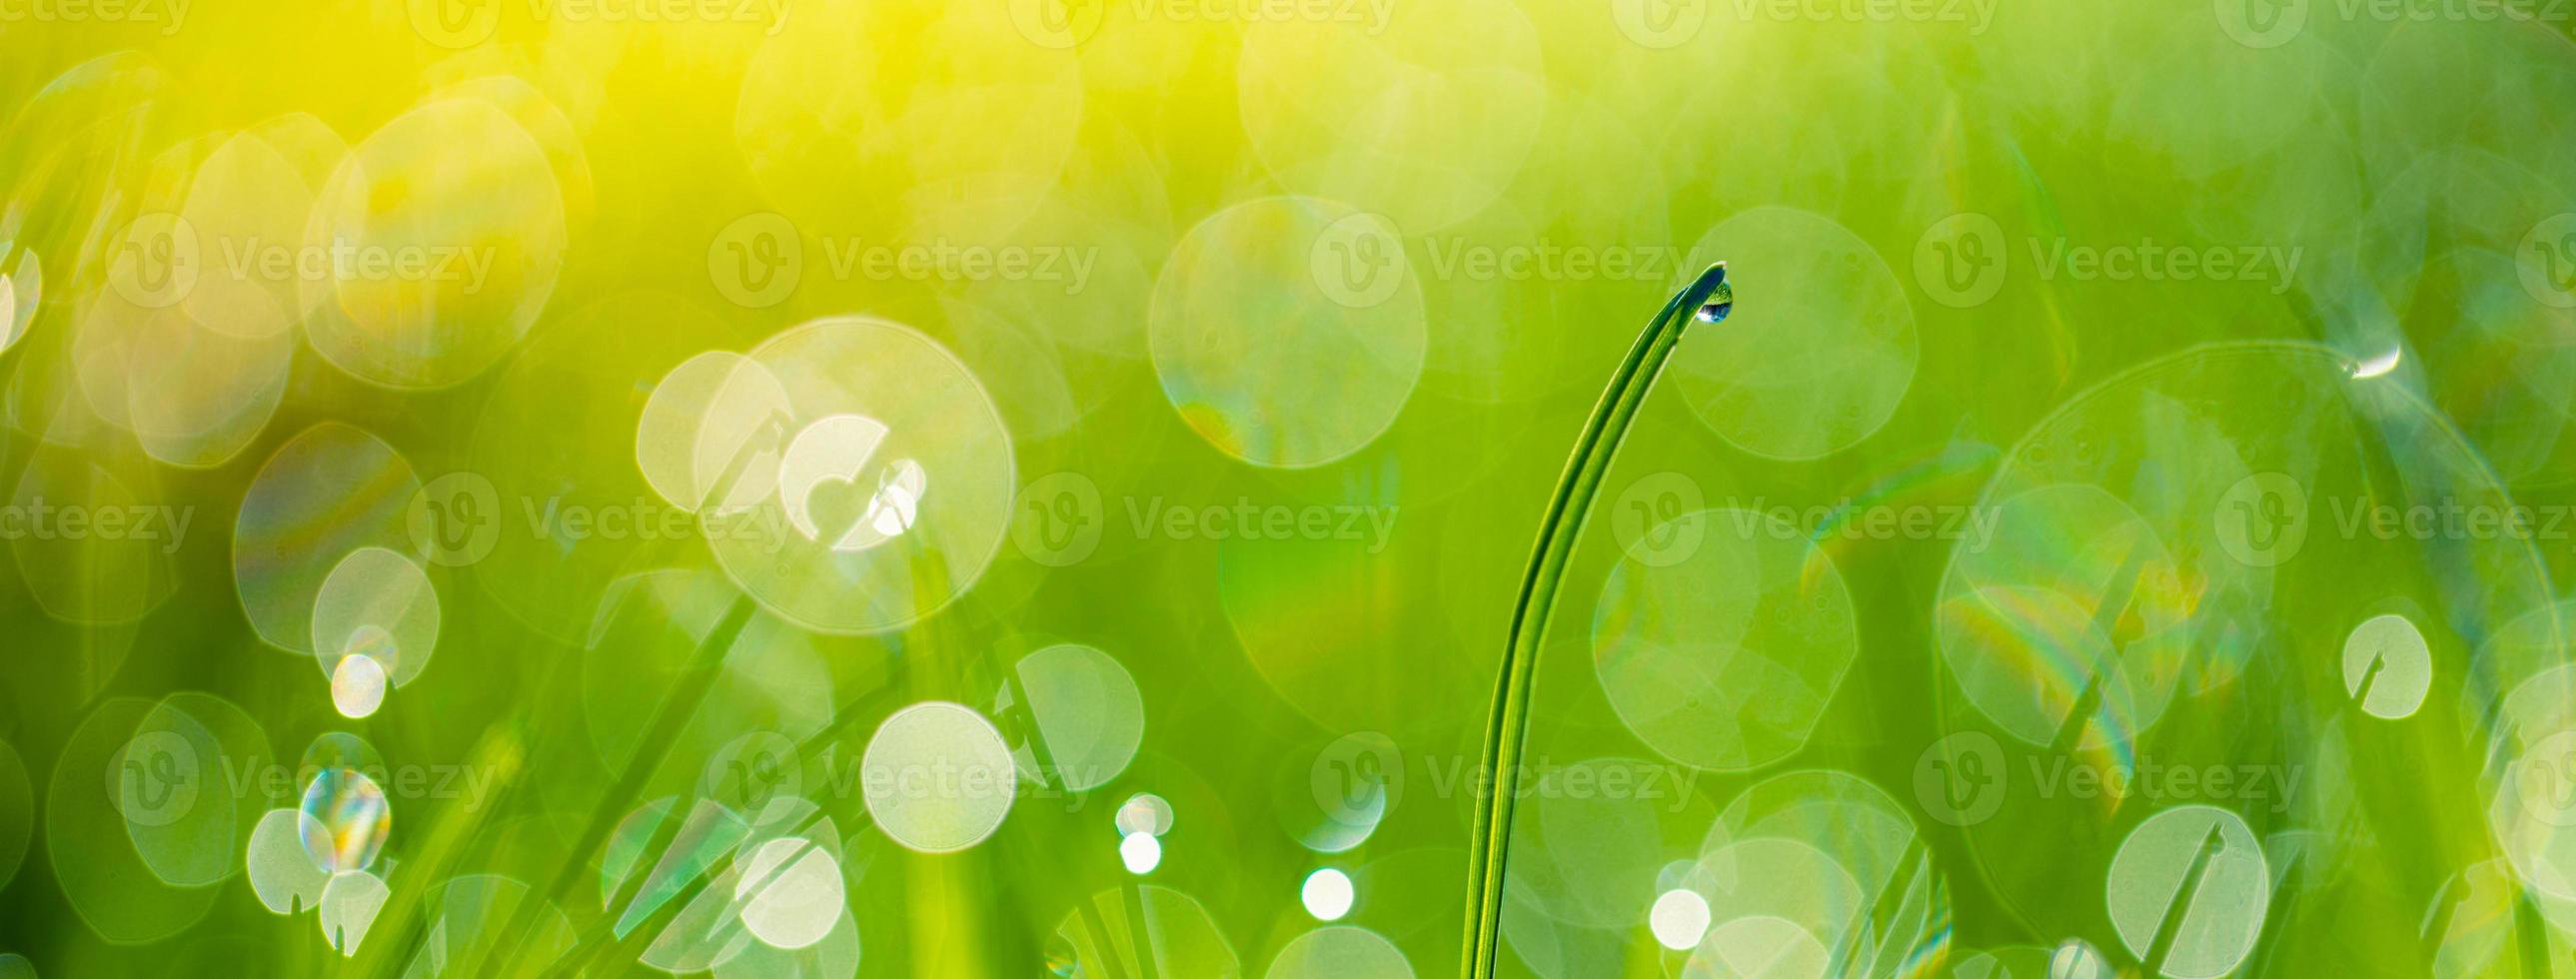 Green grass abstract blurred background. beautiful green grass in sunlight rays. Relaxing green leaf macro. Bright fresh summer or spring nature background. Panoramic nature banner photo